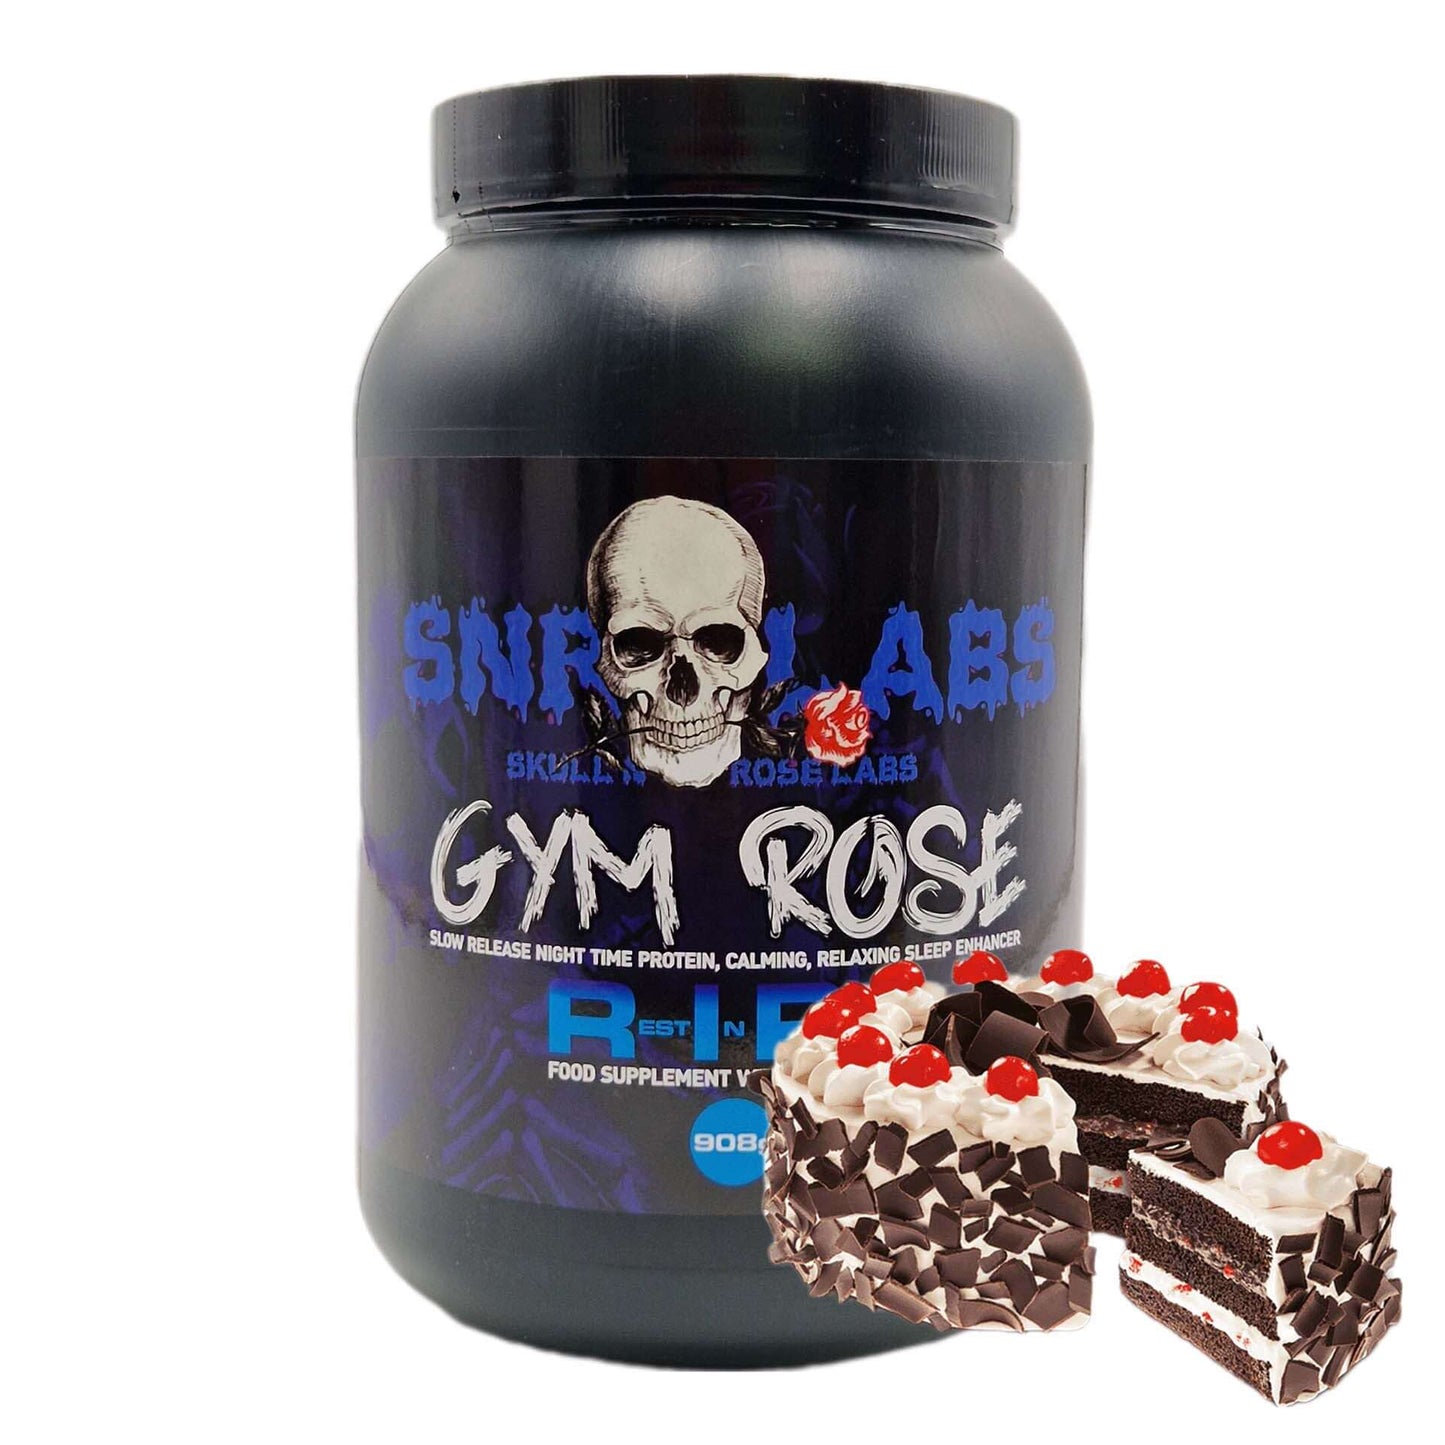 SNRLabs Gym Rose RIP night time protein Black Forest Cake